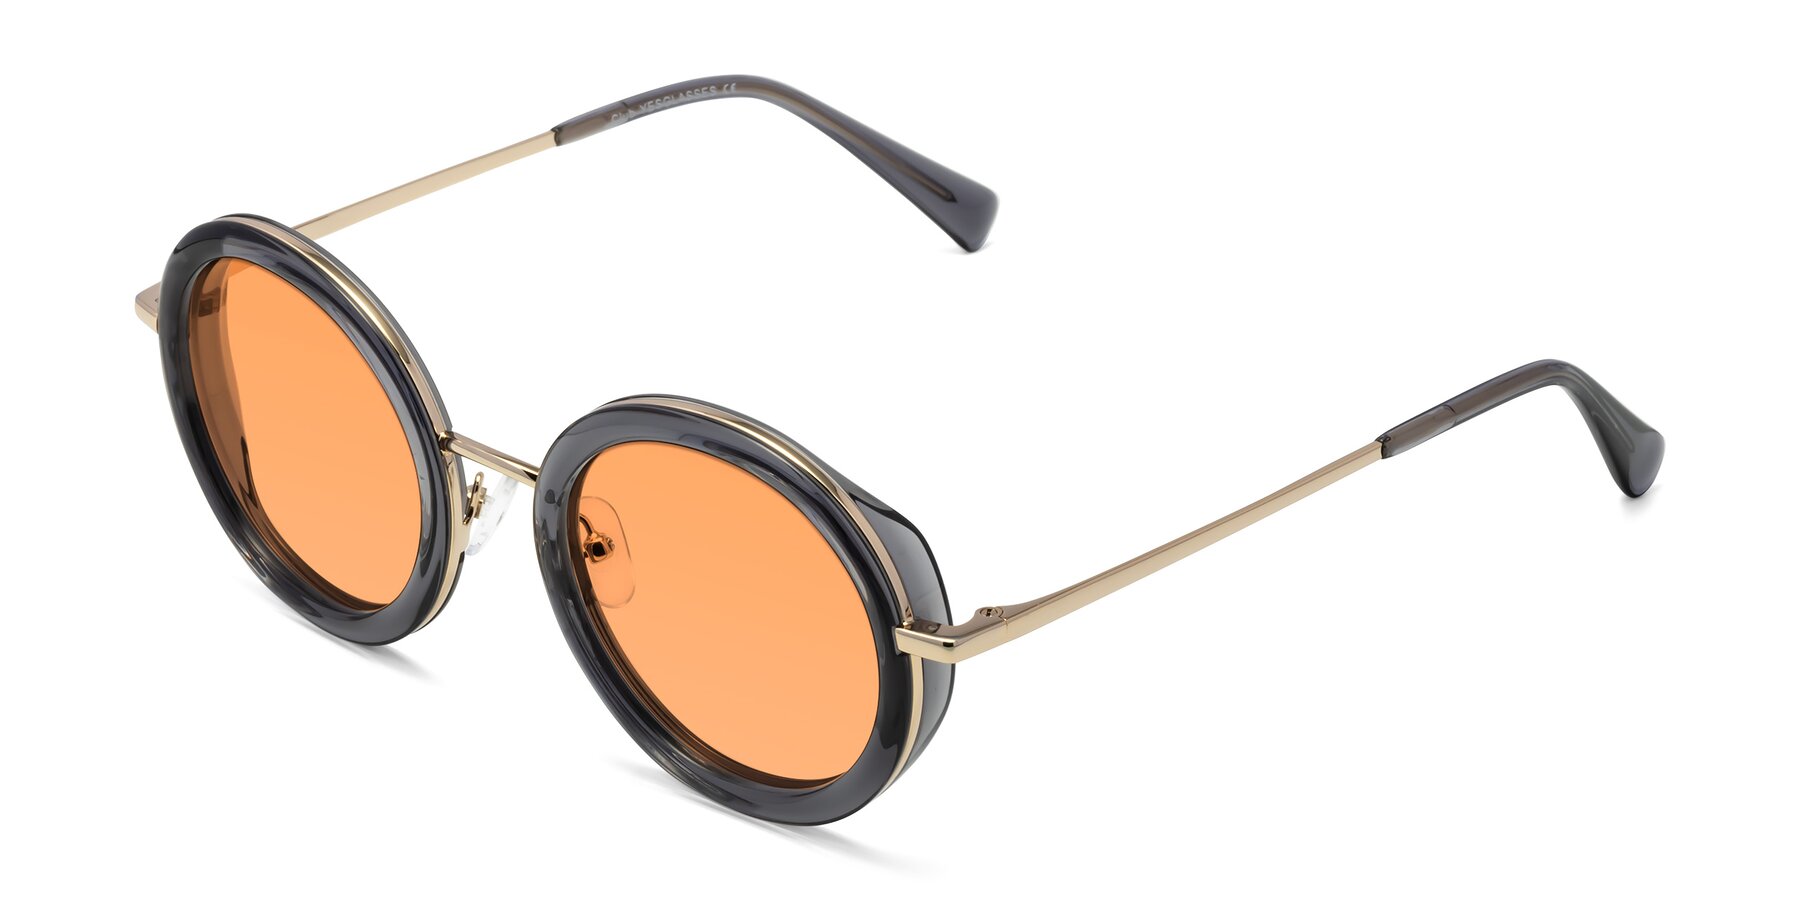 Angle of Club in Gray-Gold with Medium Orange Tinted Lenses